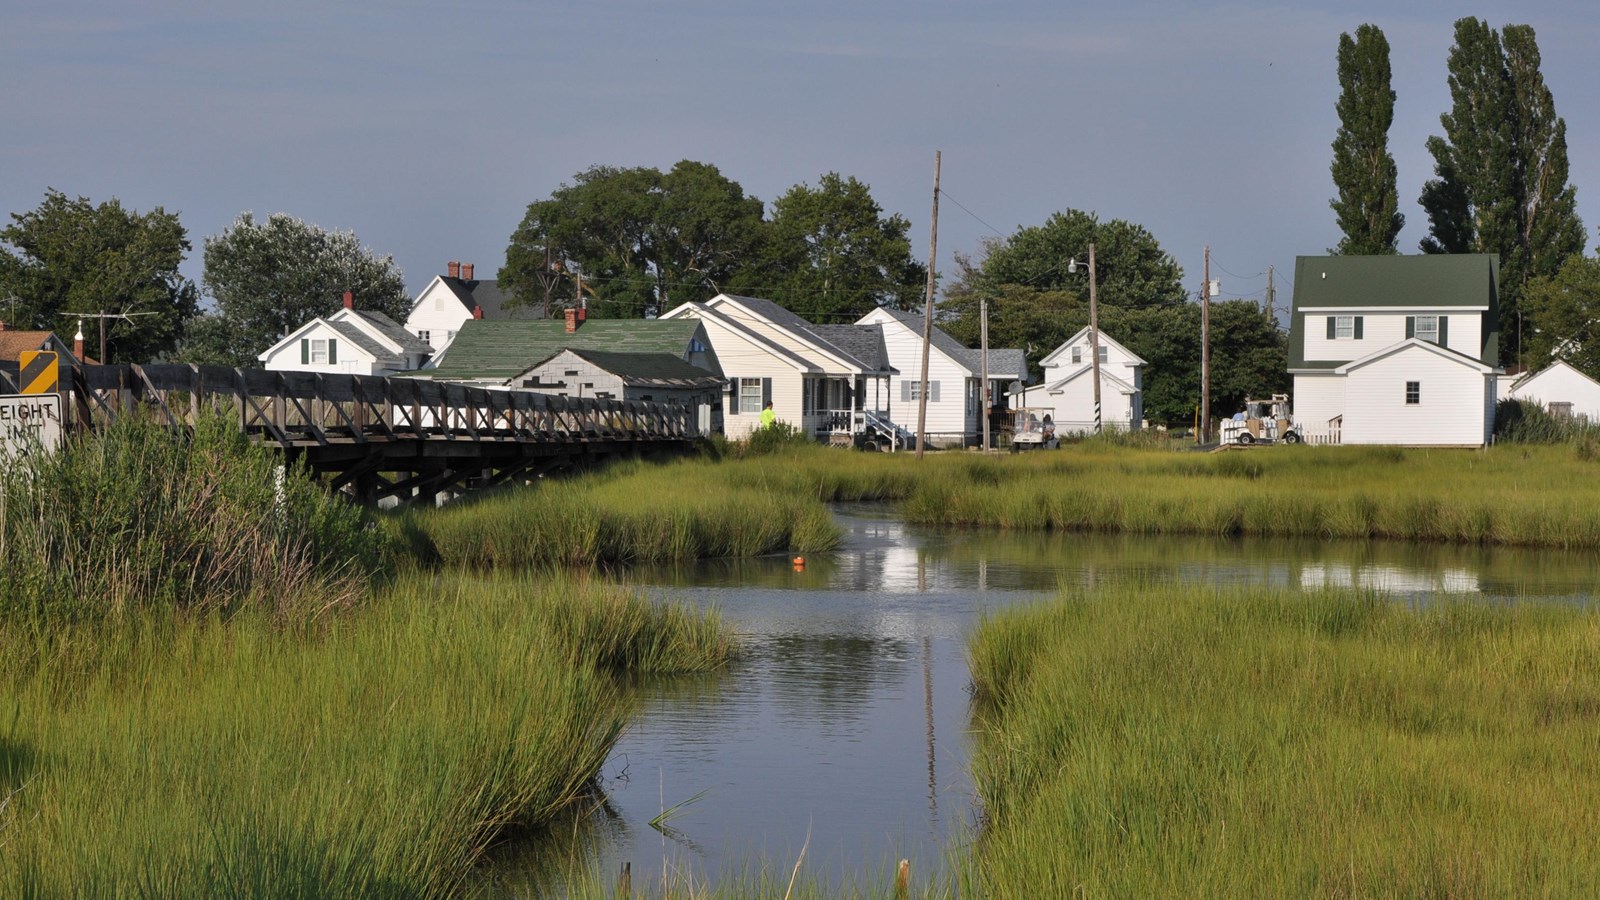 A small group of homes on Tangier Island rise above the marsh waters below.